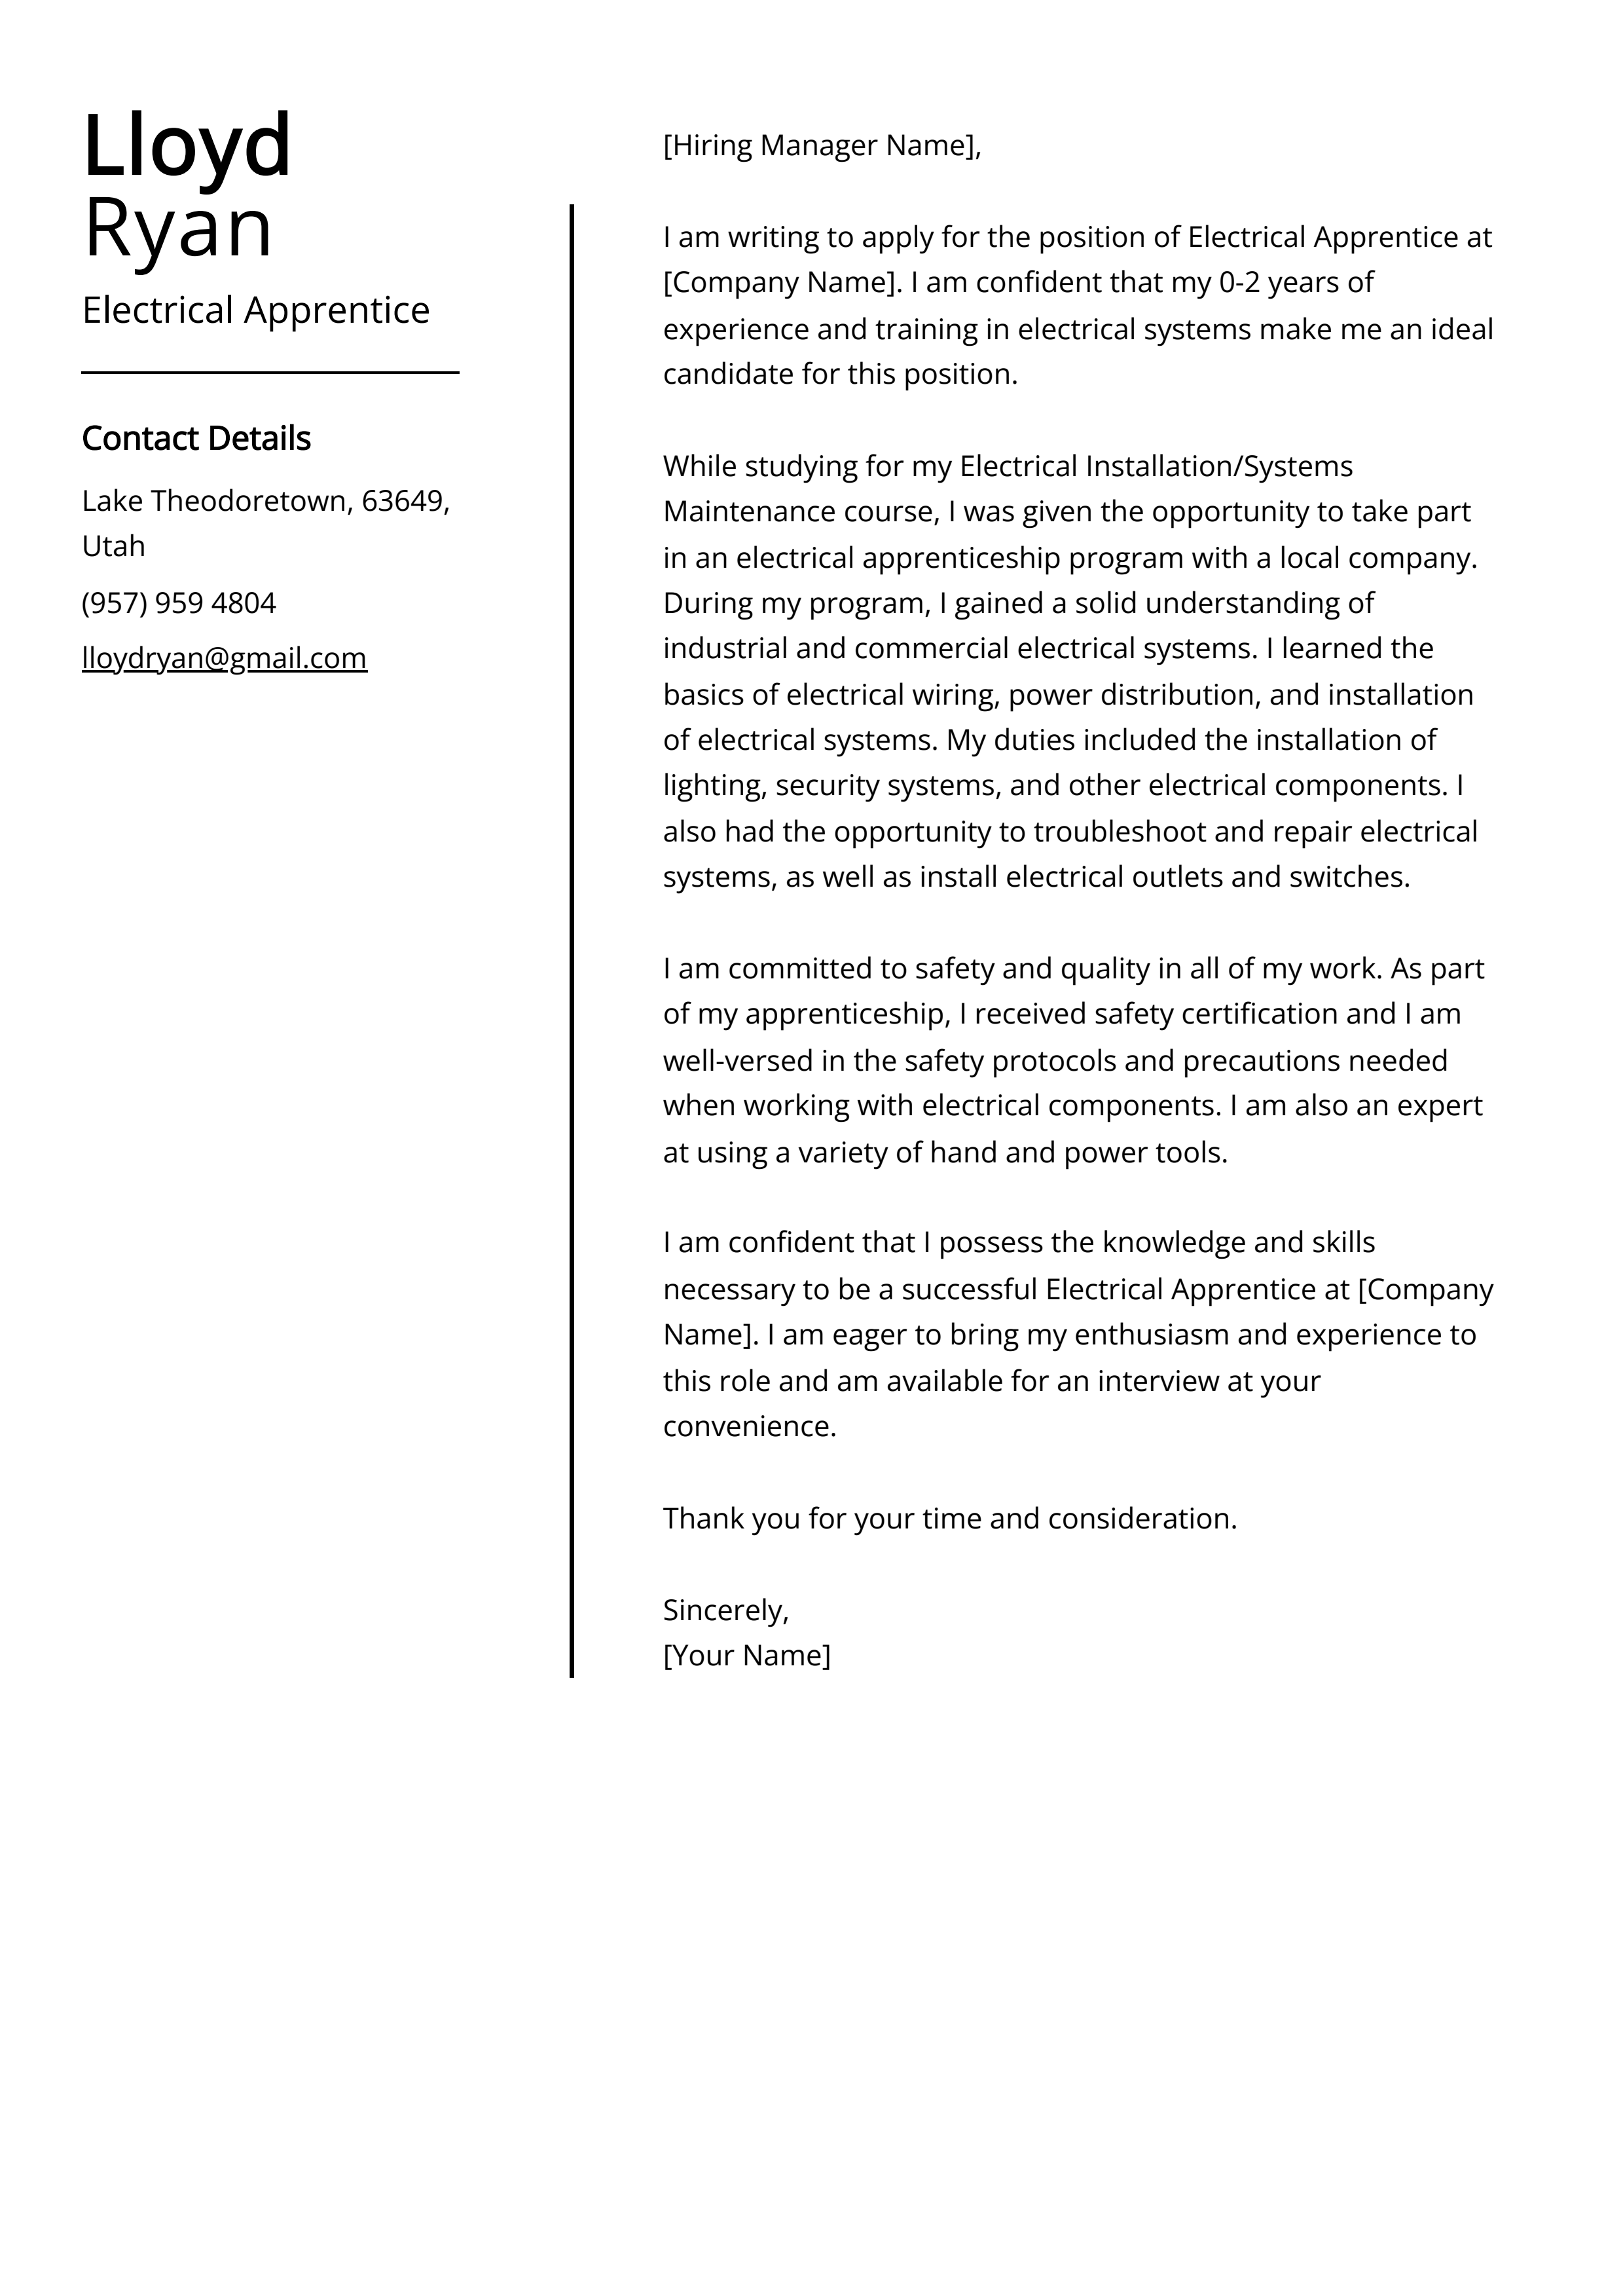 Electrical Apprentice Cover Letter Example